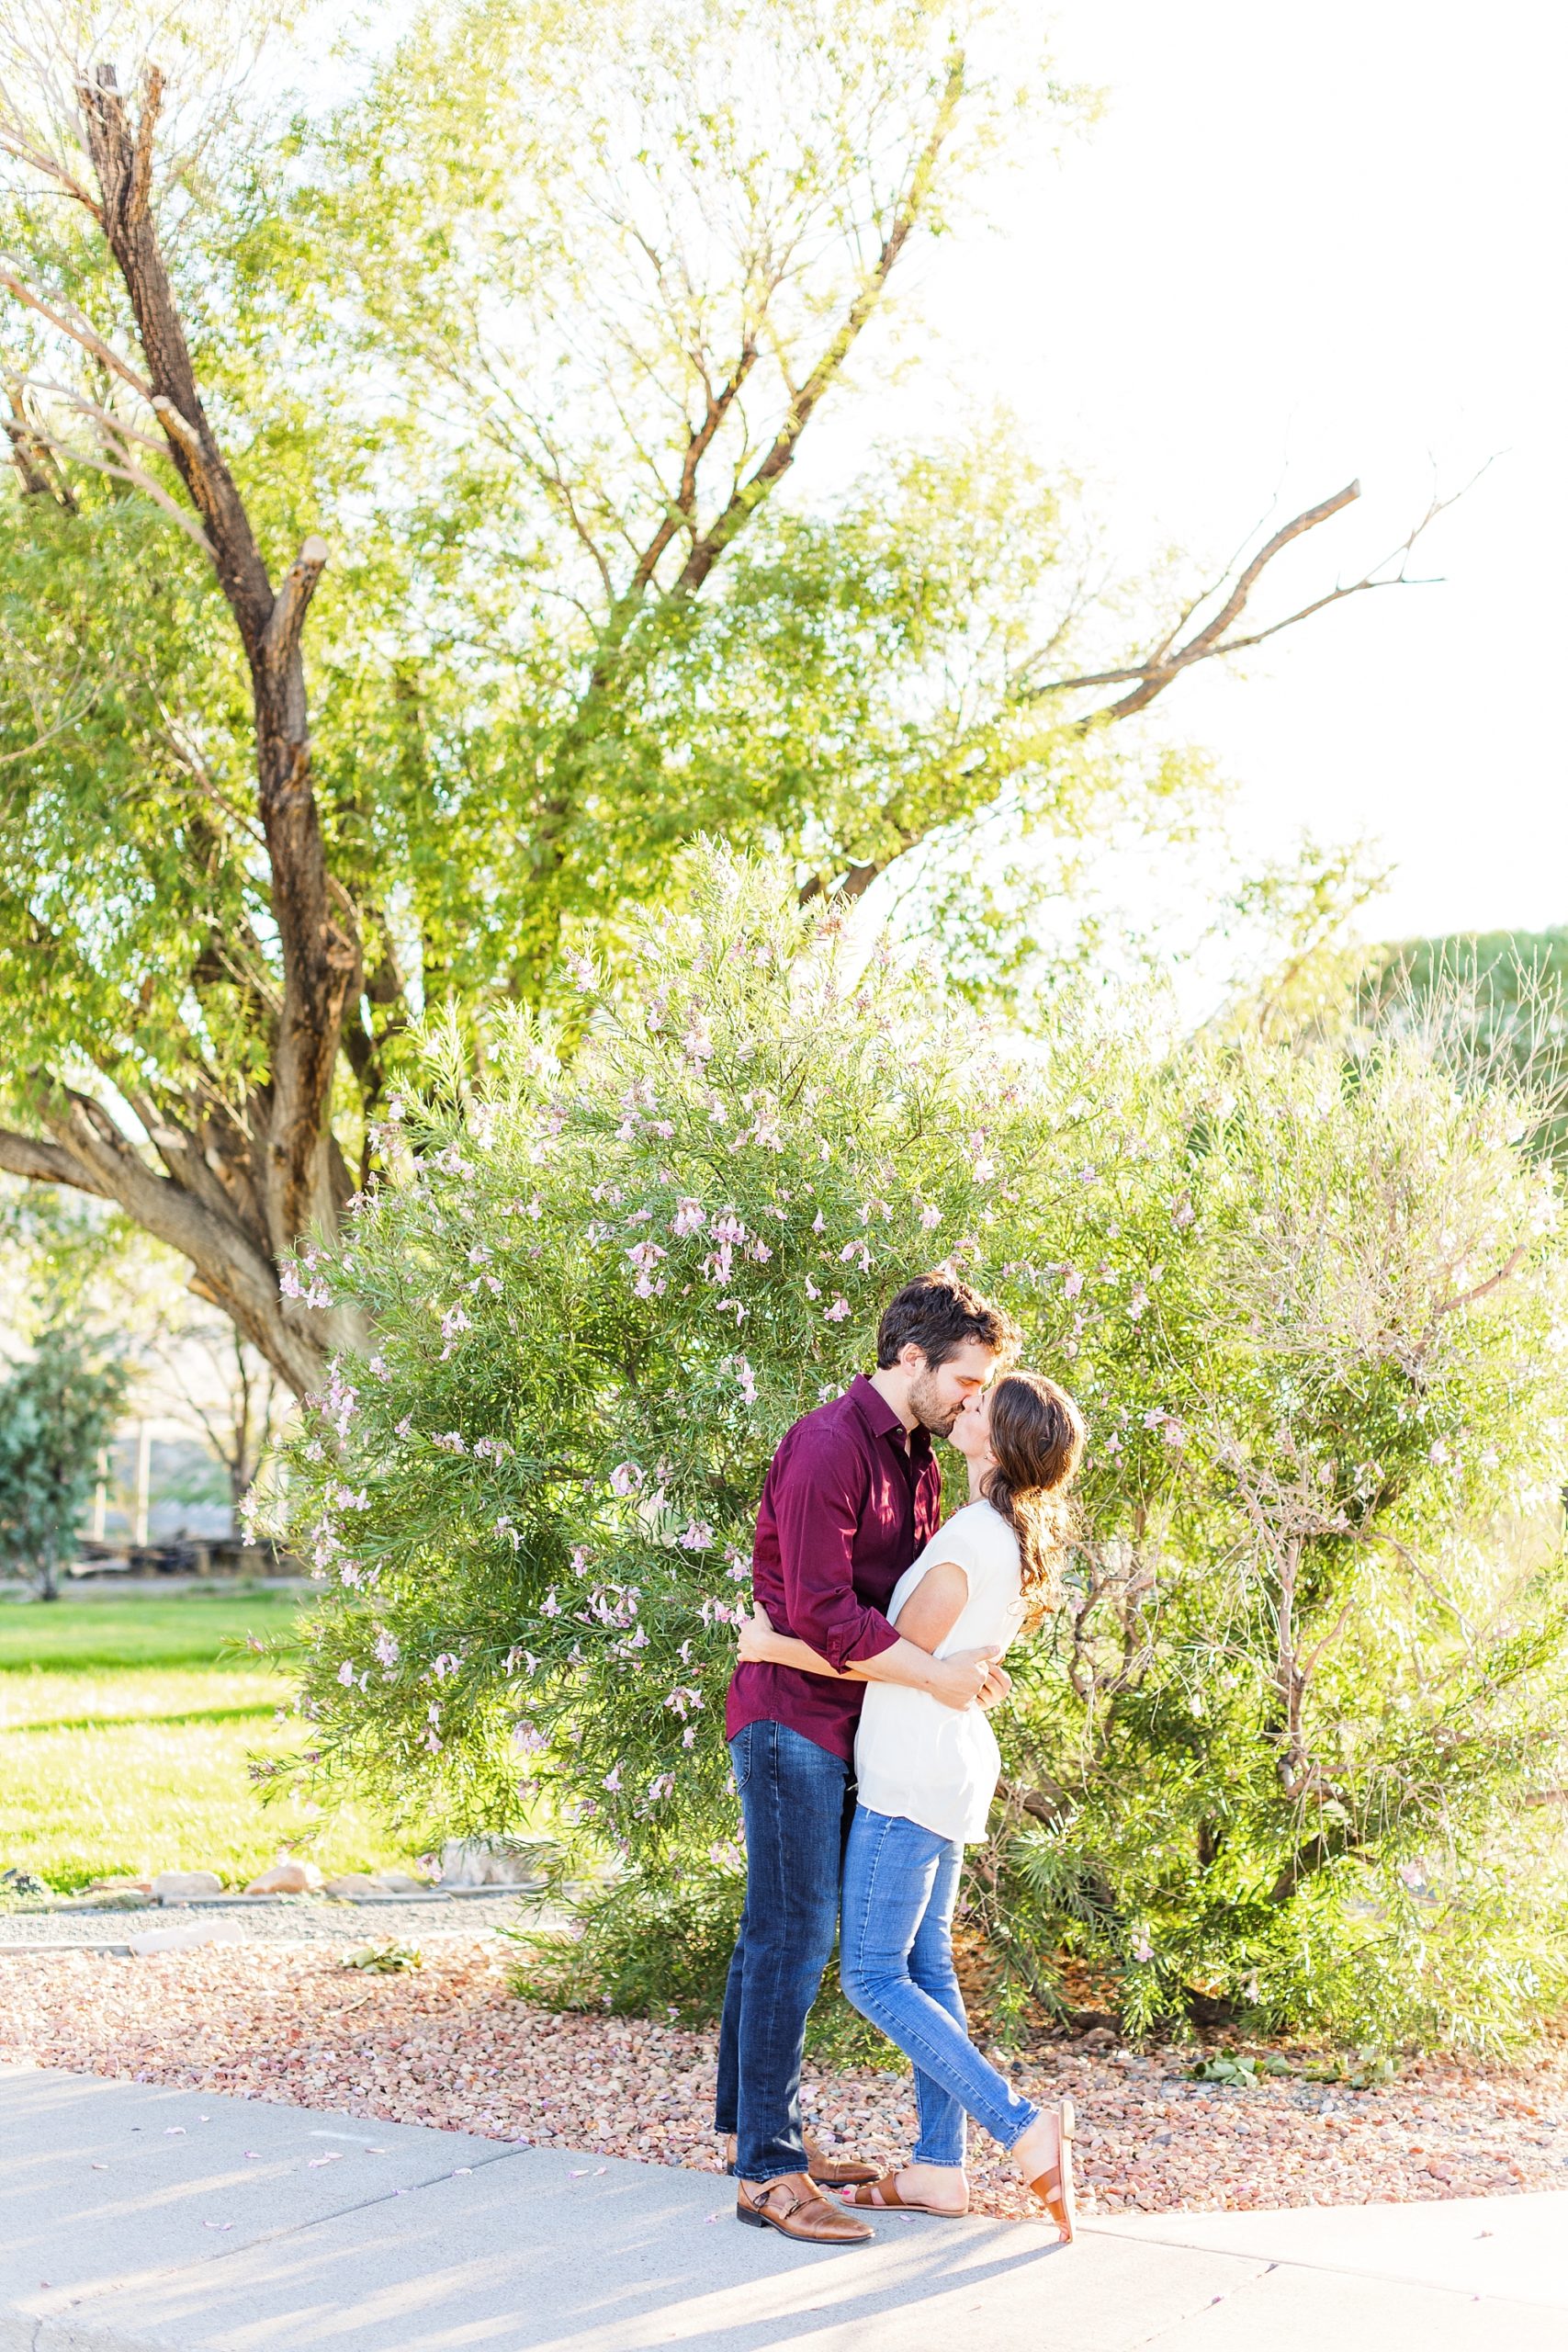 Engagement photos at the Great Saltair